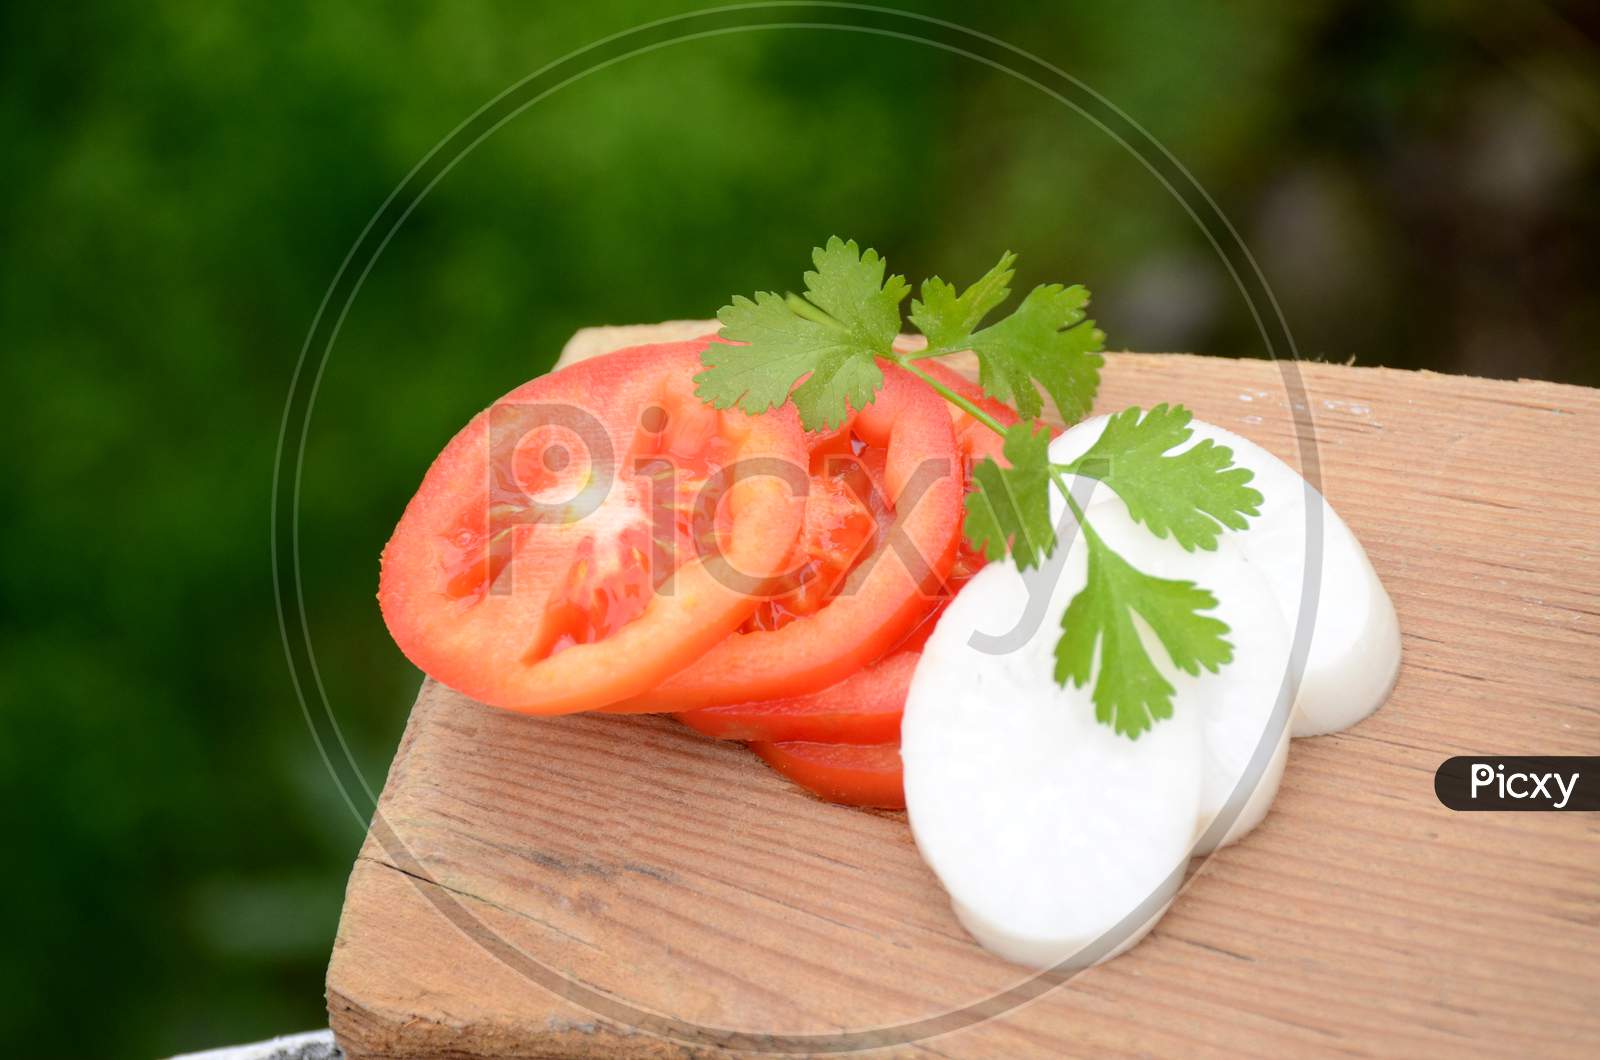 The Red Tomato With White Radish Sliced And Green Coriander On The Green Brown Wooden Background.